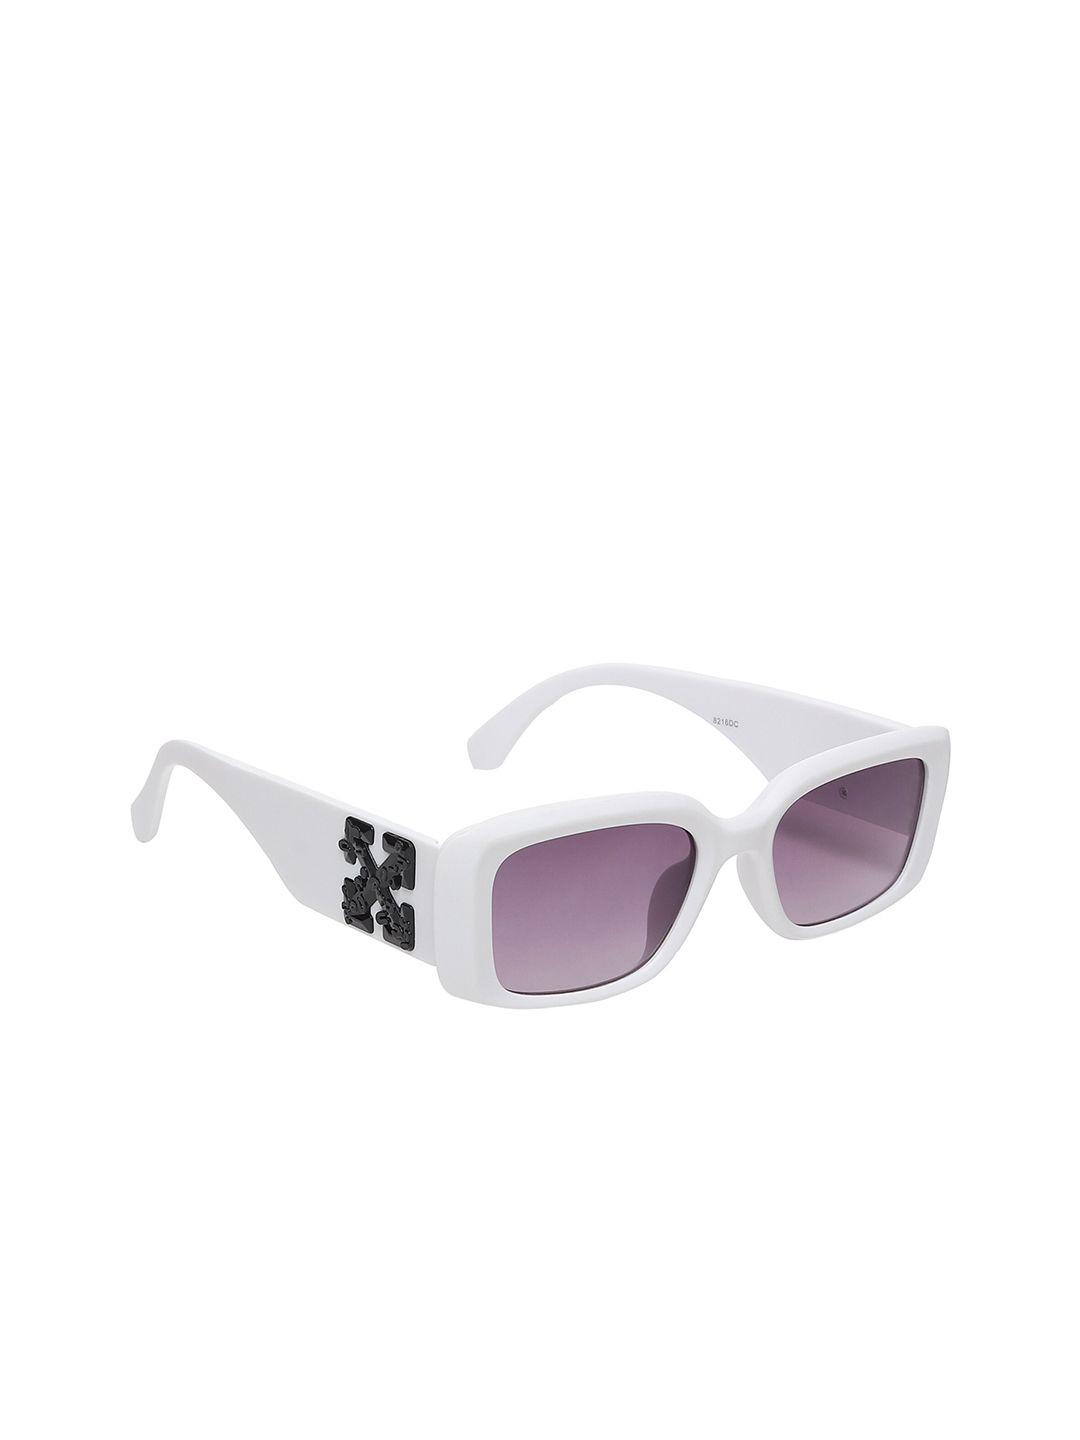 swiss-design-unisex-purple-lens-&-white-other-sunglasses-with-uv-protected-lens